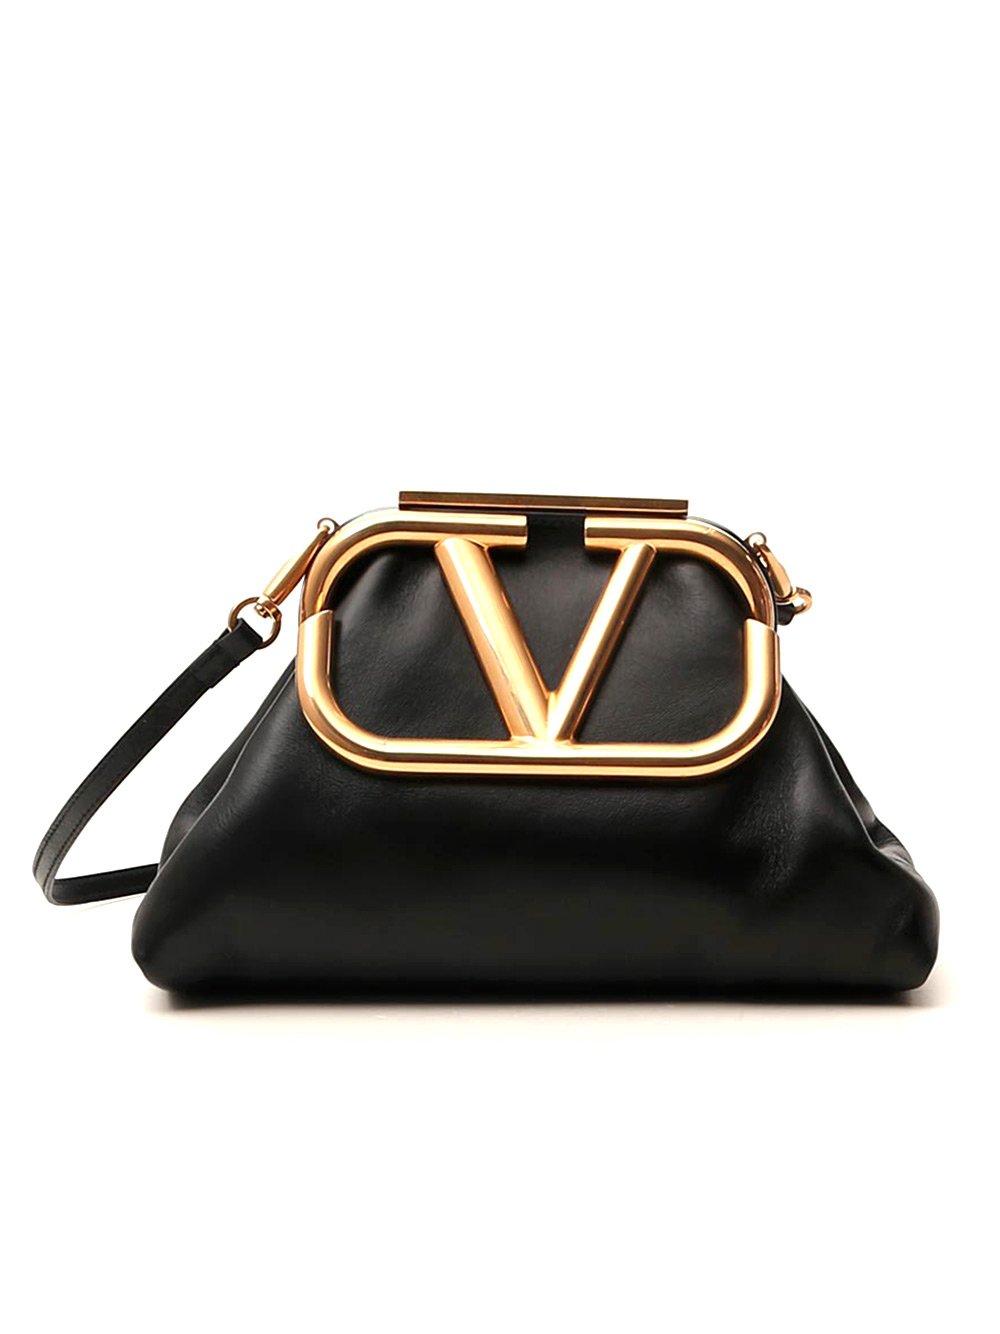 Valentino Leather Supervee Clutch Bag in Black - Lyst